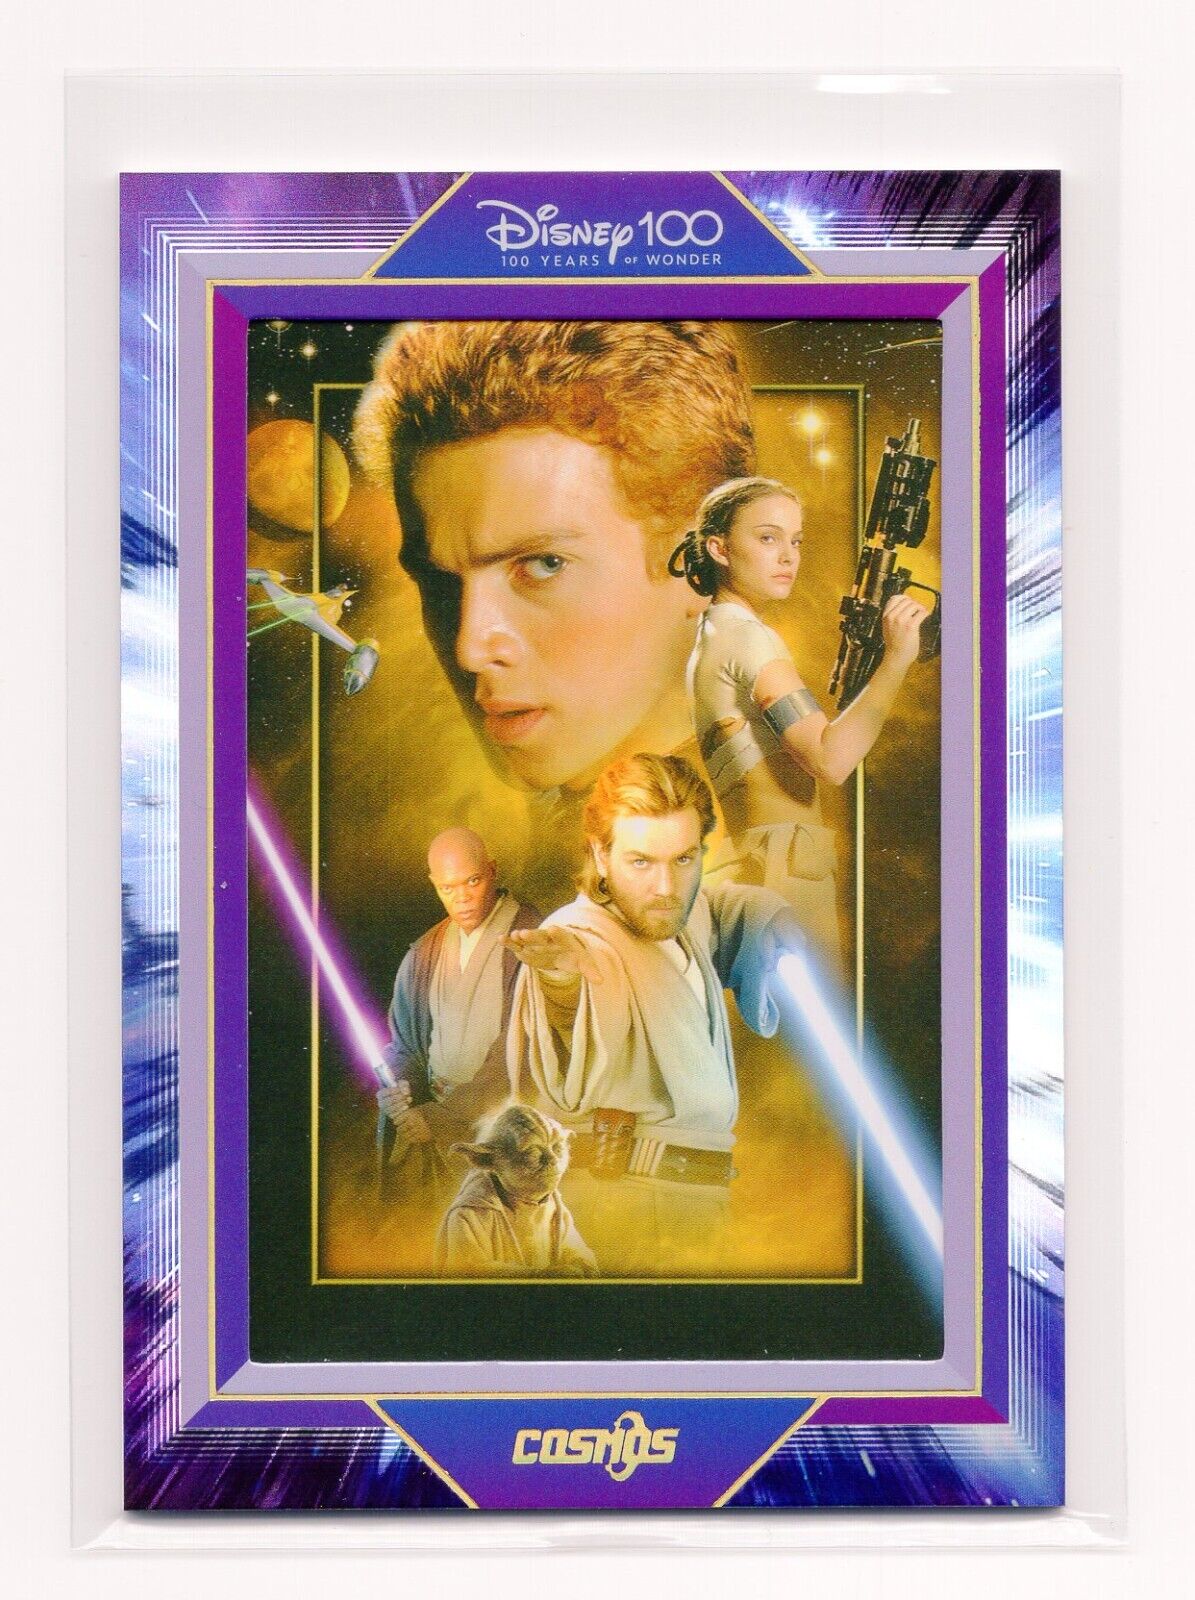 2023 Kakawow Cosmos Disney 100 ATTACK OF THE CLONES Movie Poster /288 #CDQHB83